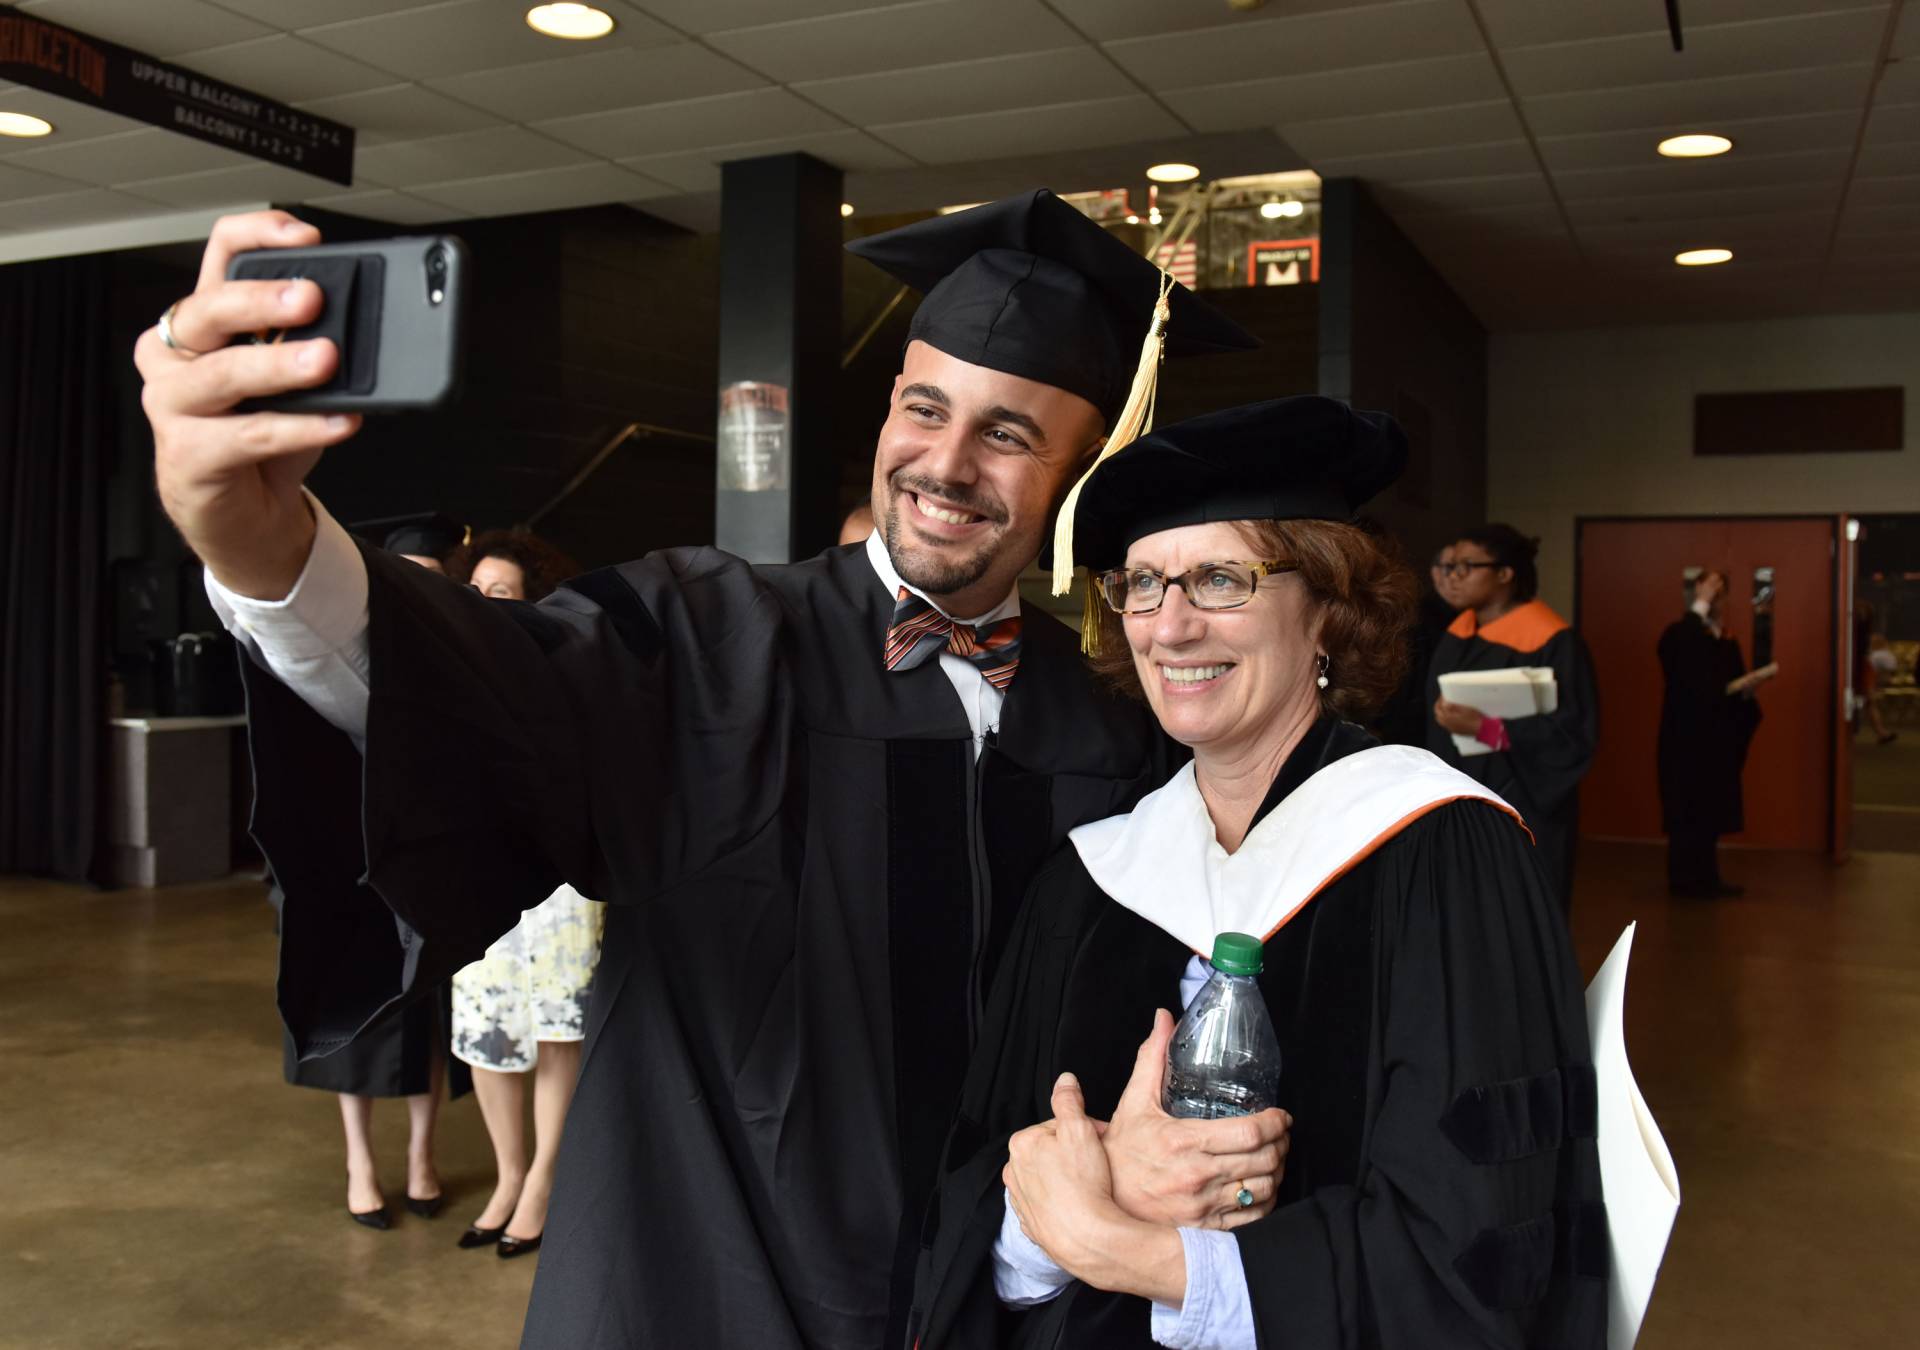 Student takes selfie with advisor